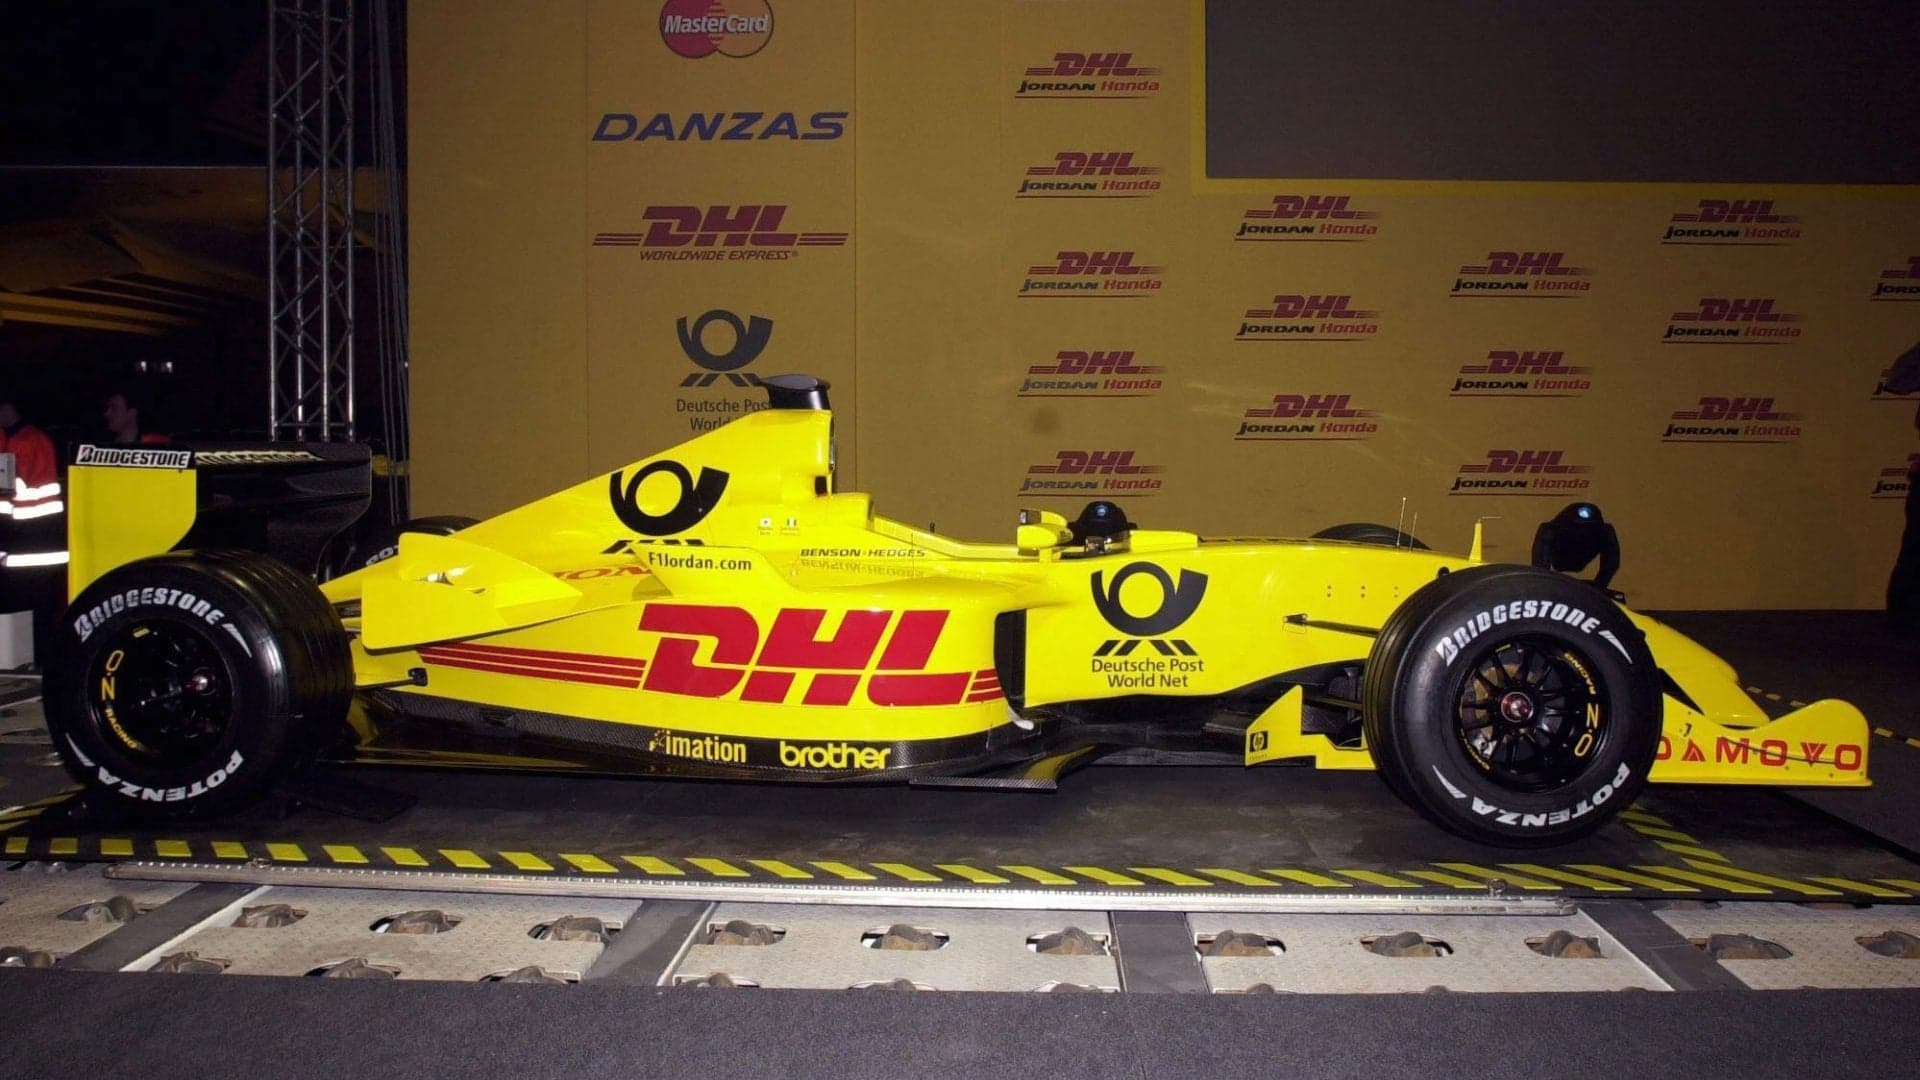 This 2002 Jordan F1 Car With Will Make Your Racing Dreams Come True for $293,000